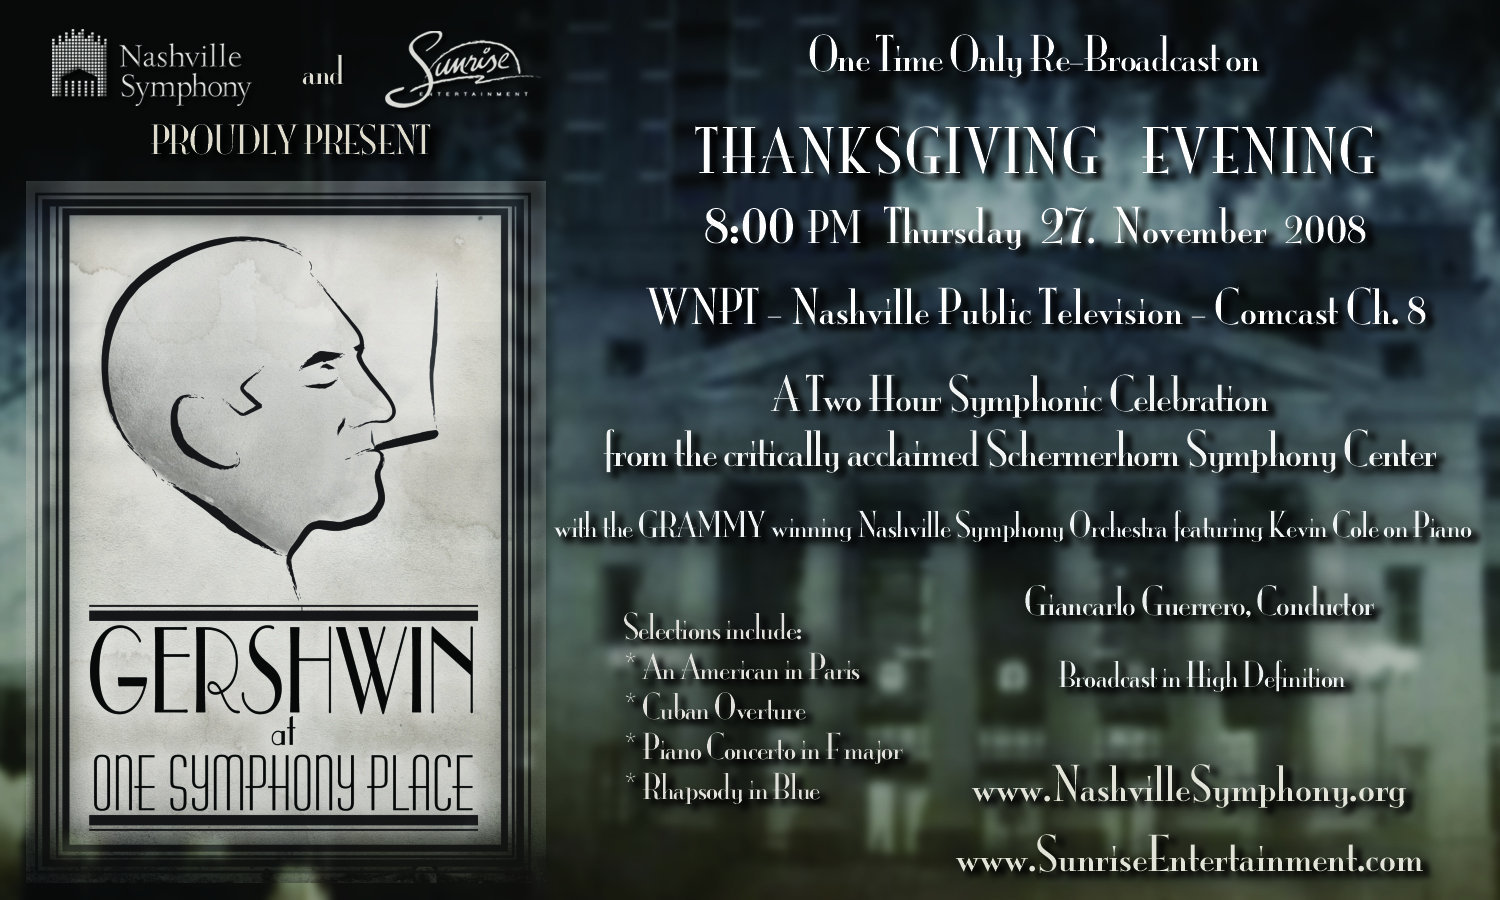 The Nashville Symphony and Sunrise Entertainment proudly present a Two Hour Symphonic Celebration of GEORGE GERSHWIN from the critically acclaimed Schermerhorn Symphony Center, Nashville, Tennessee in 2008.